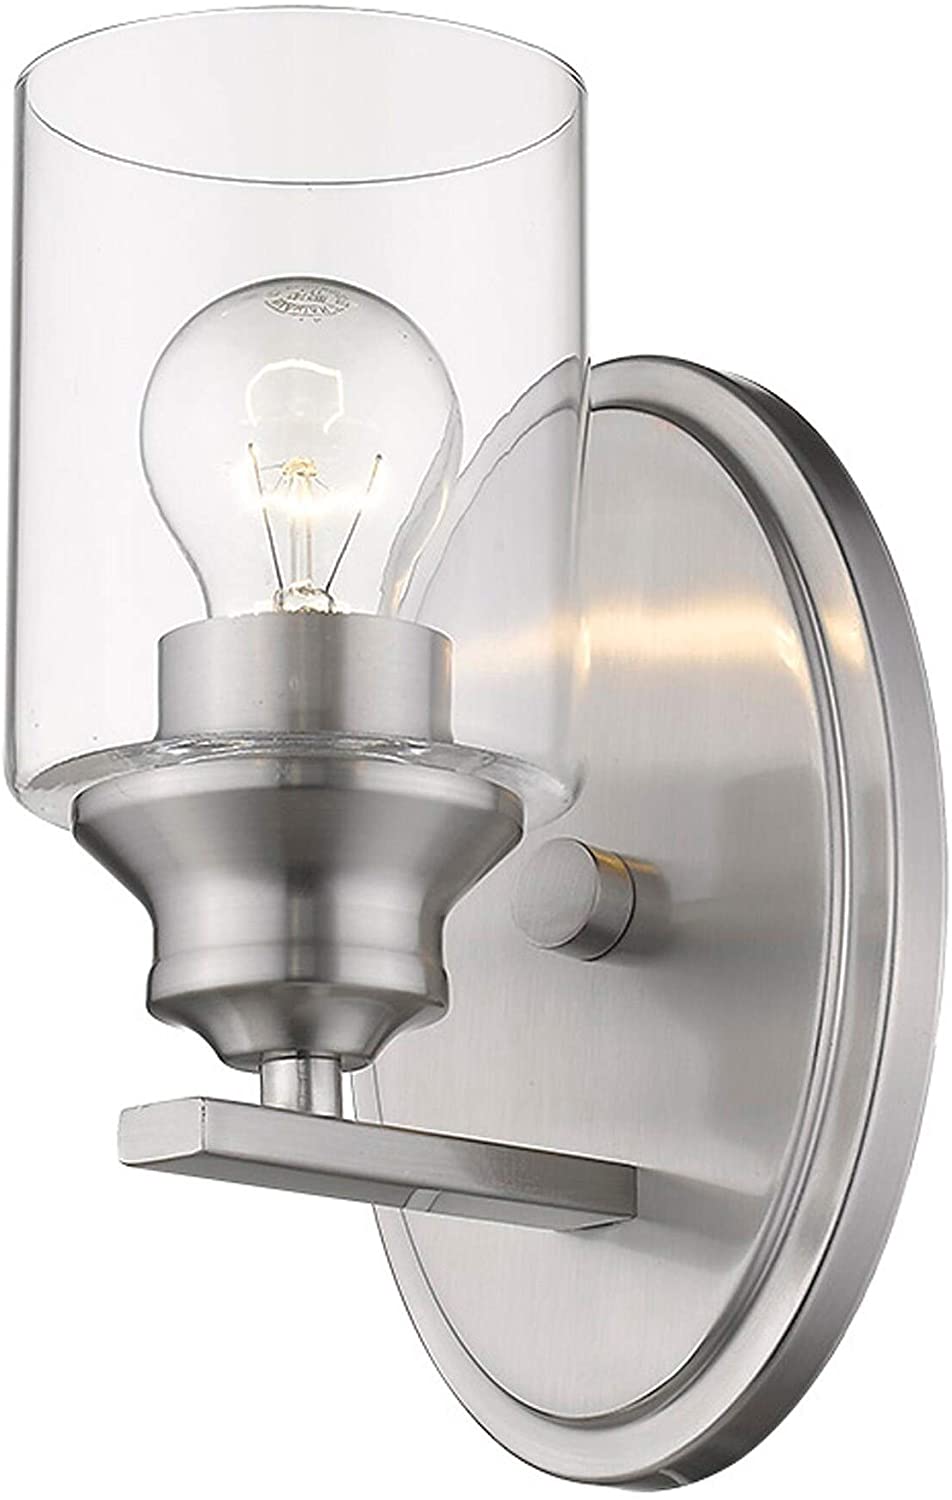 1 Light Satin Nickel Wall Sconce Modern Contemporary Steel Dimmable